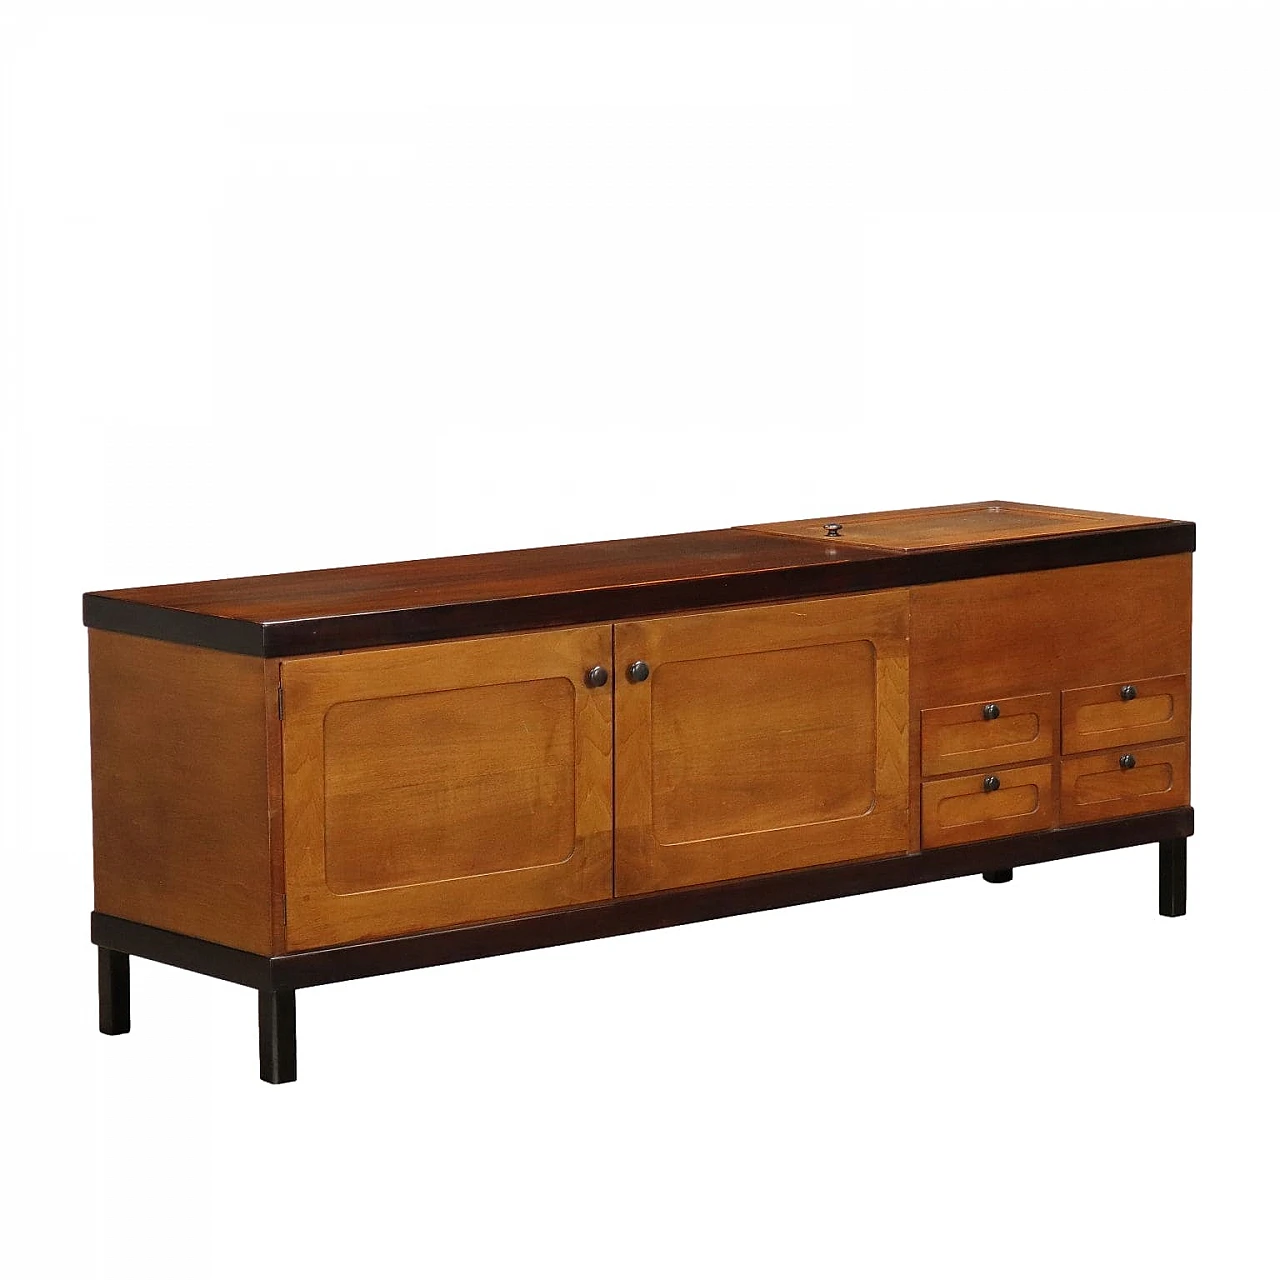 Sideboard by Piero Ranzani for Elam in wood, 1960s 1